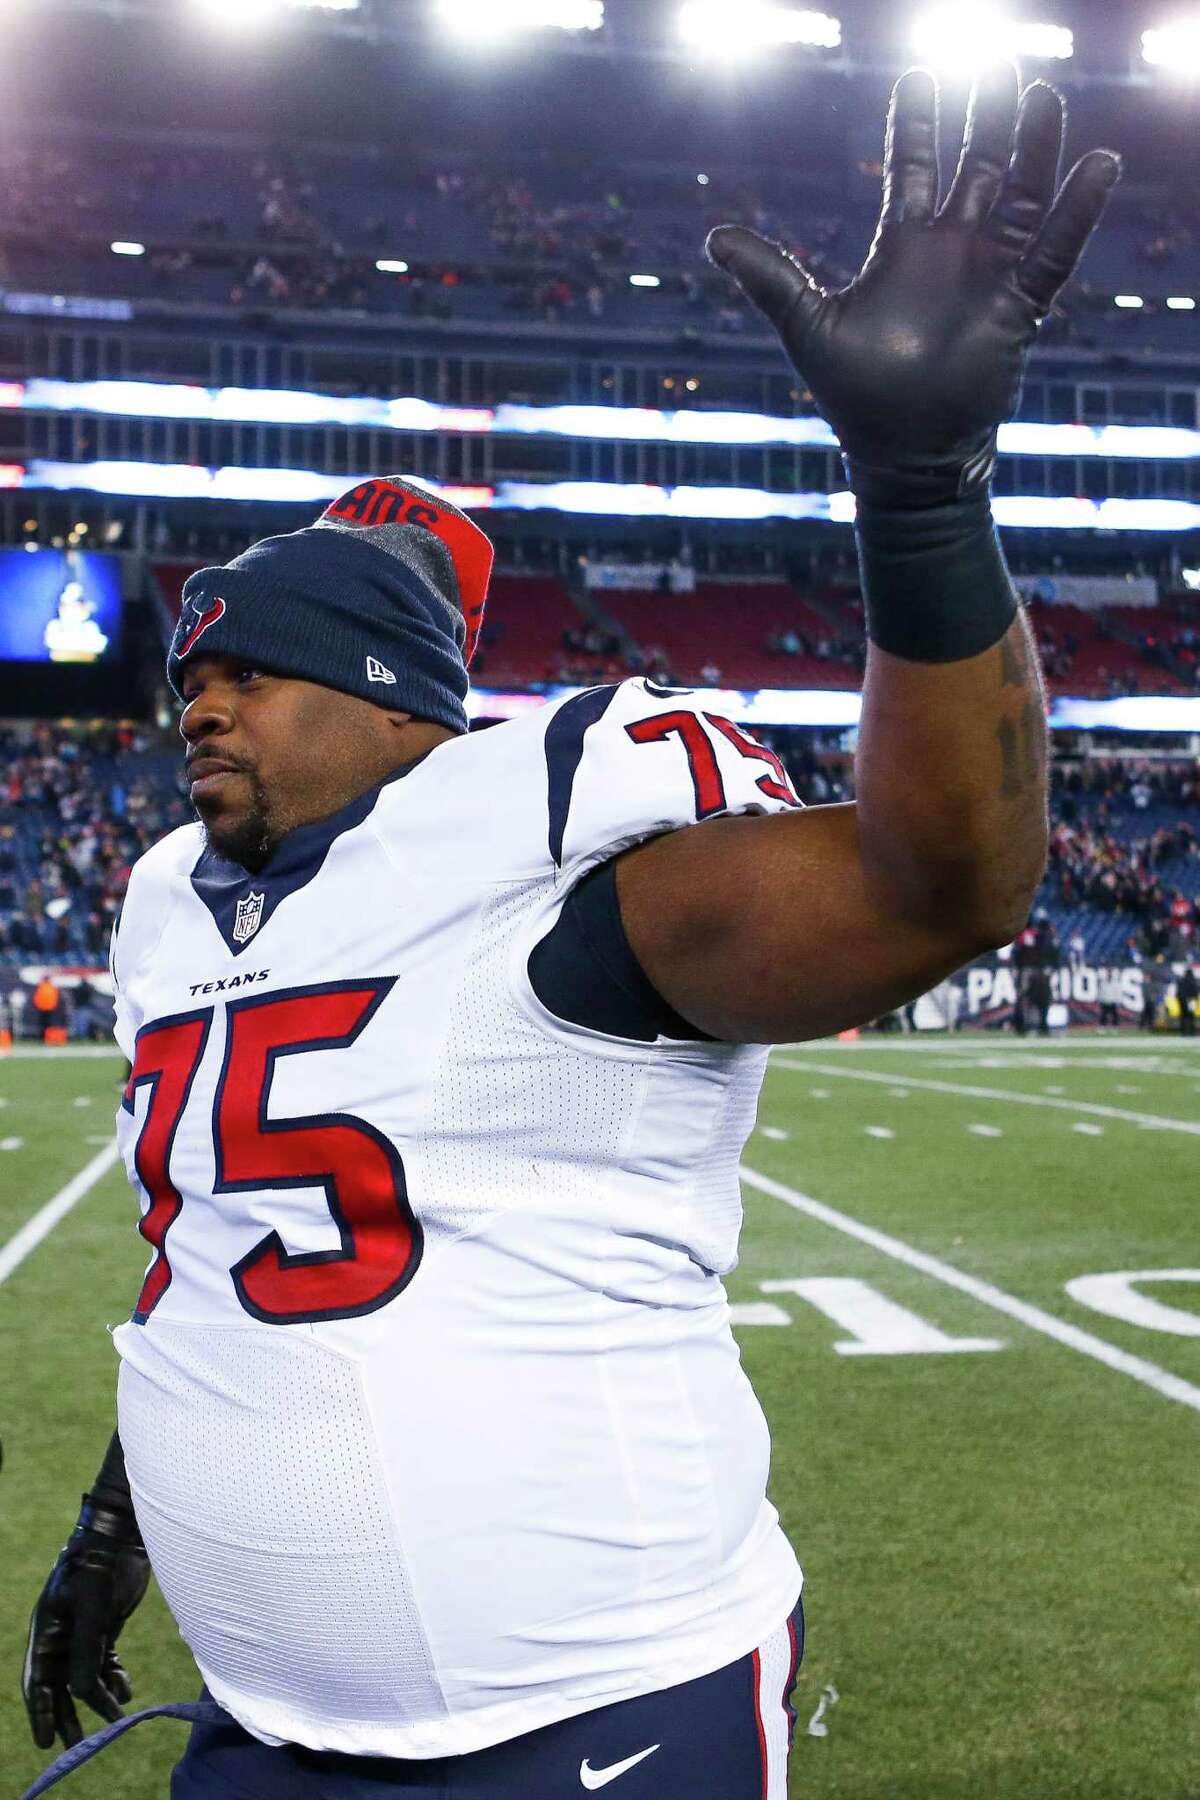 Houston Texans nose tackle Vince Wilfork (75) waves to fans after losing an AFC Divisional Playoff game at Gillette Stadium on Saturday, Jan. 14, 2017, in Foxborough.